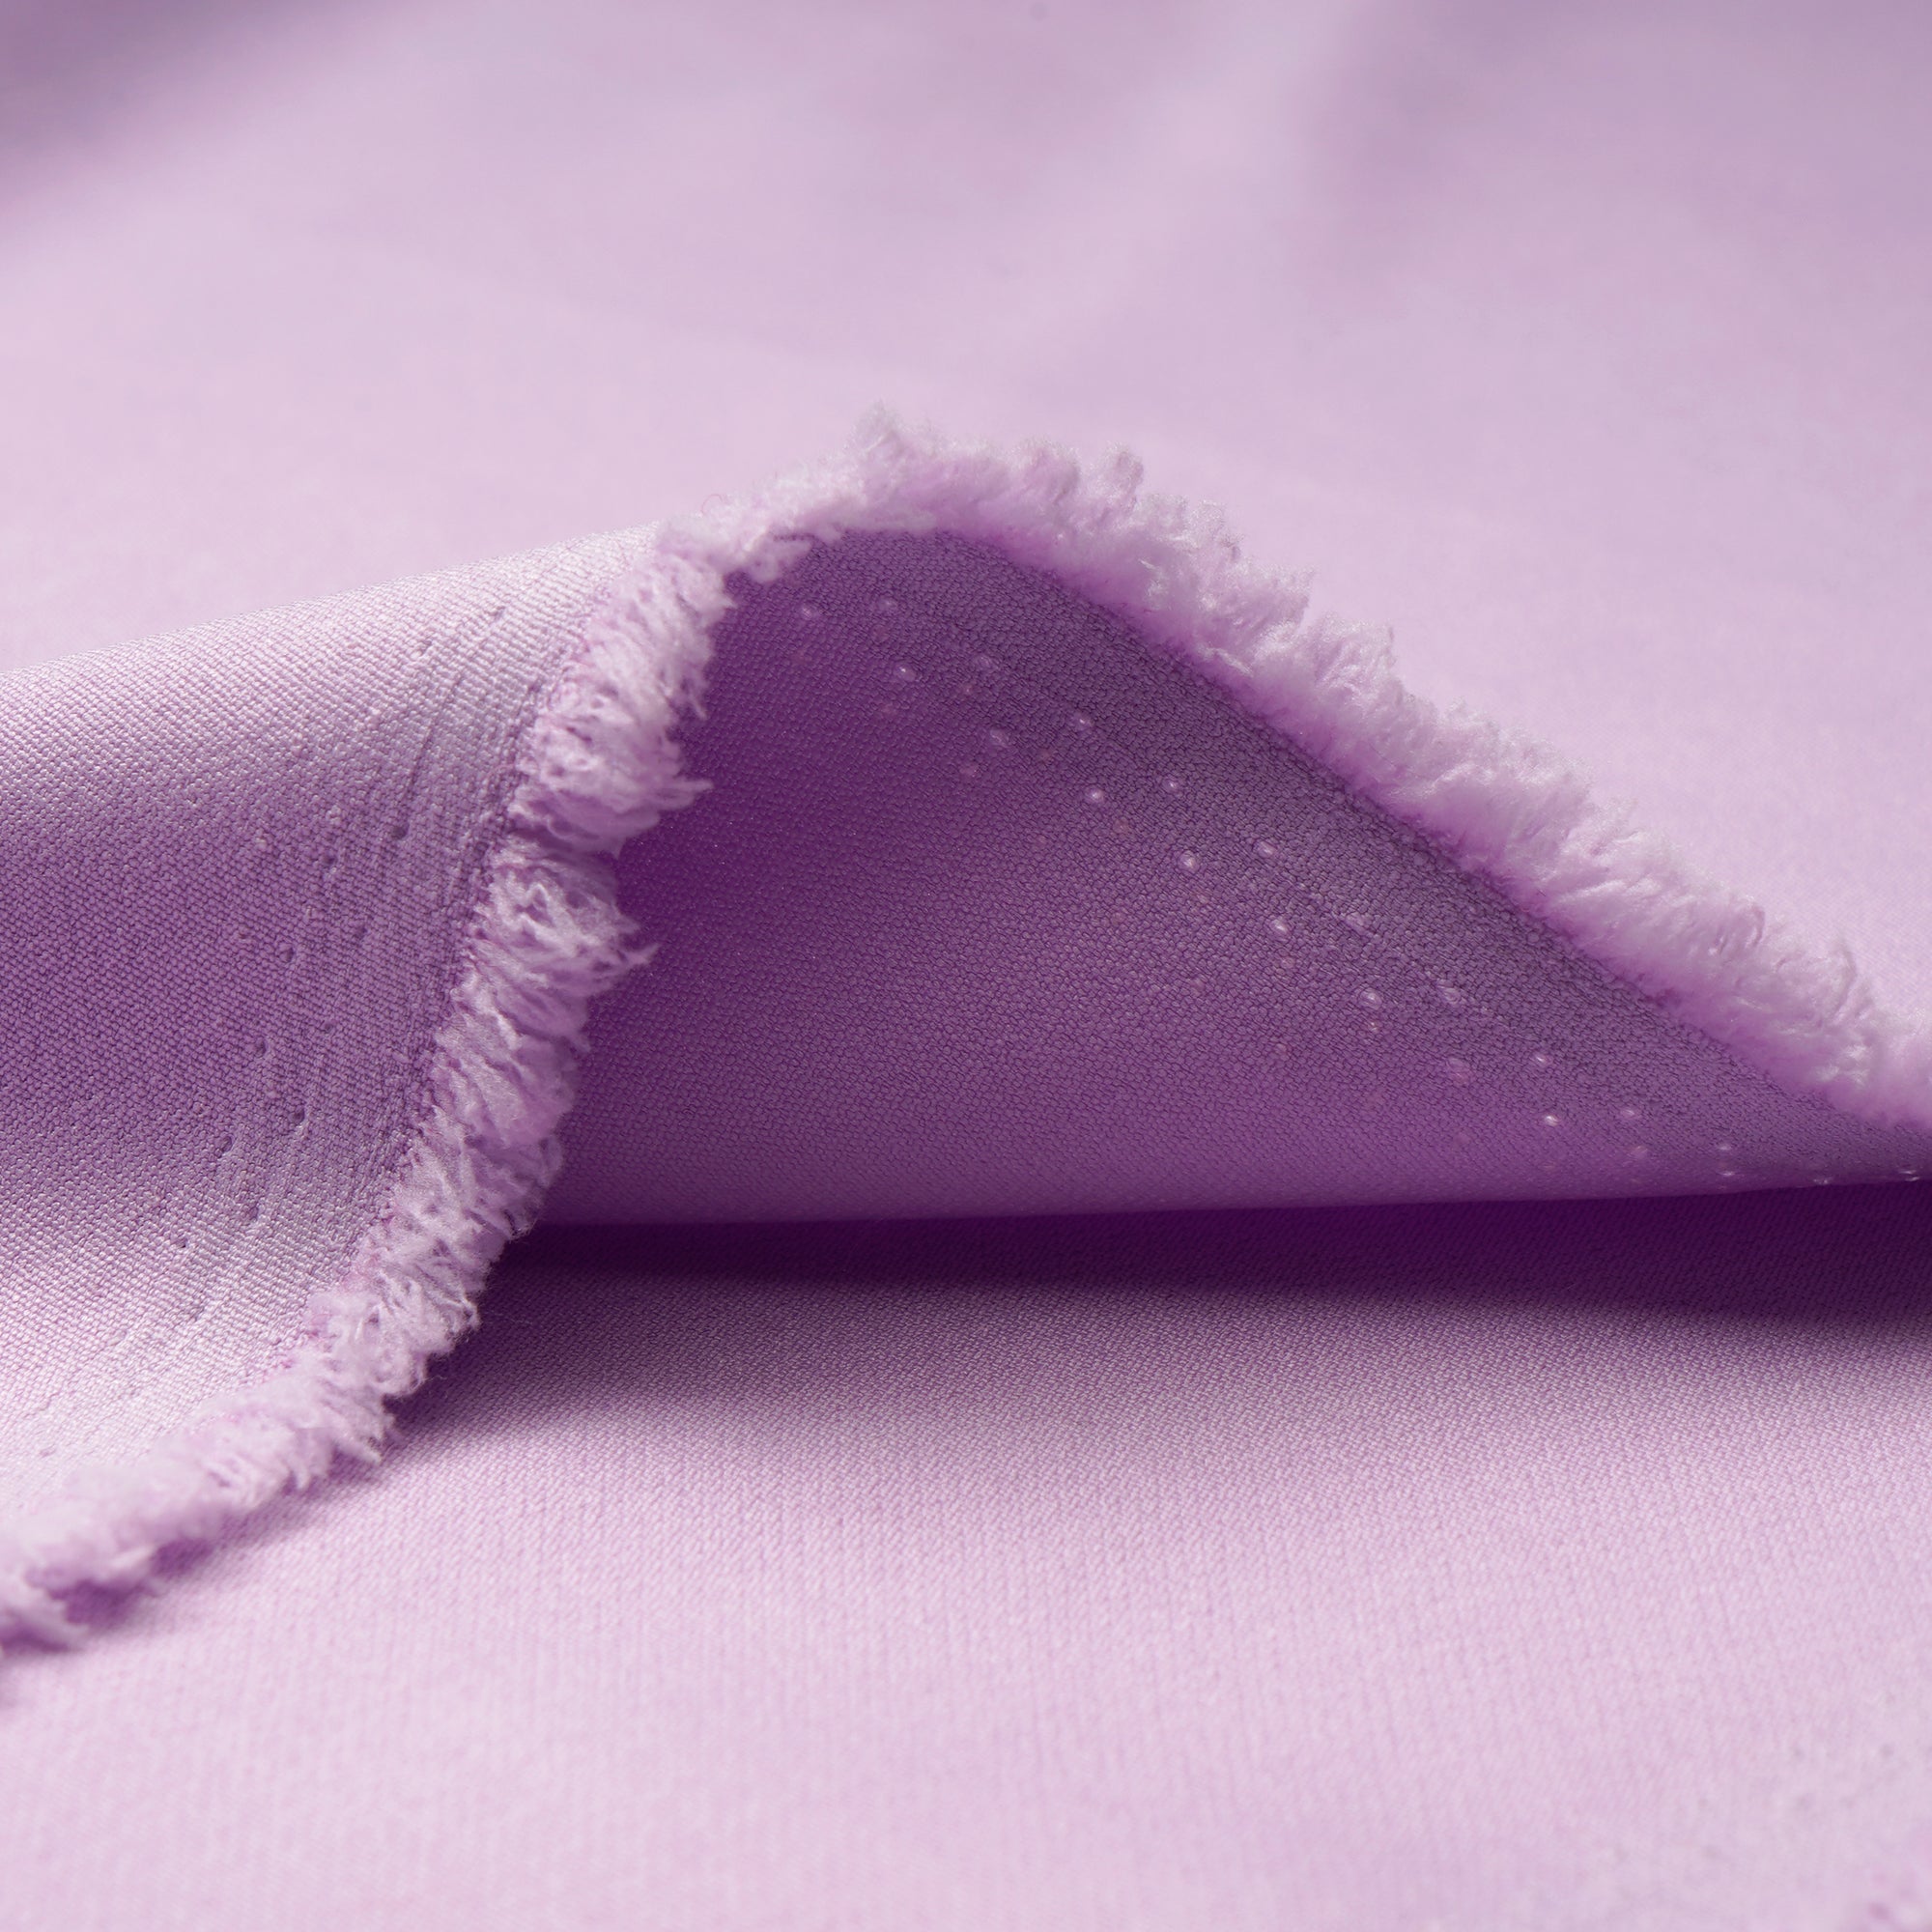 Lavender Solid Dyed Imported Banana Crepe Fabric (60" Width)